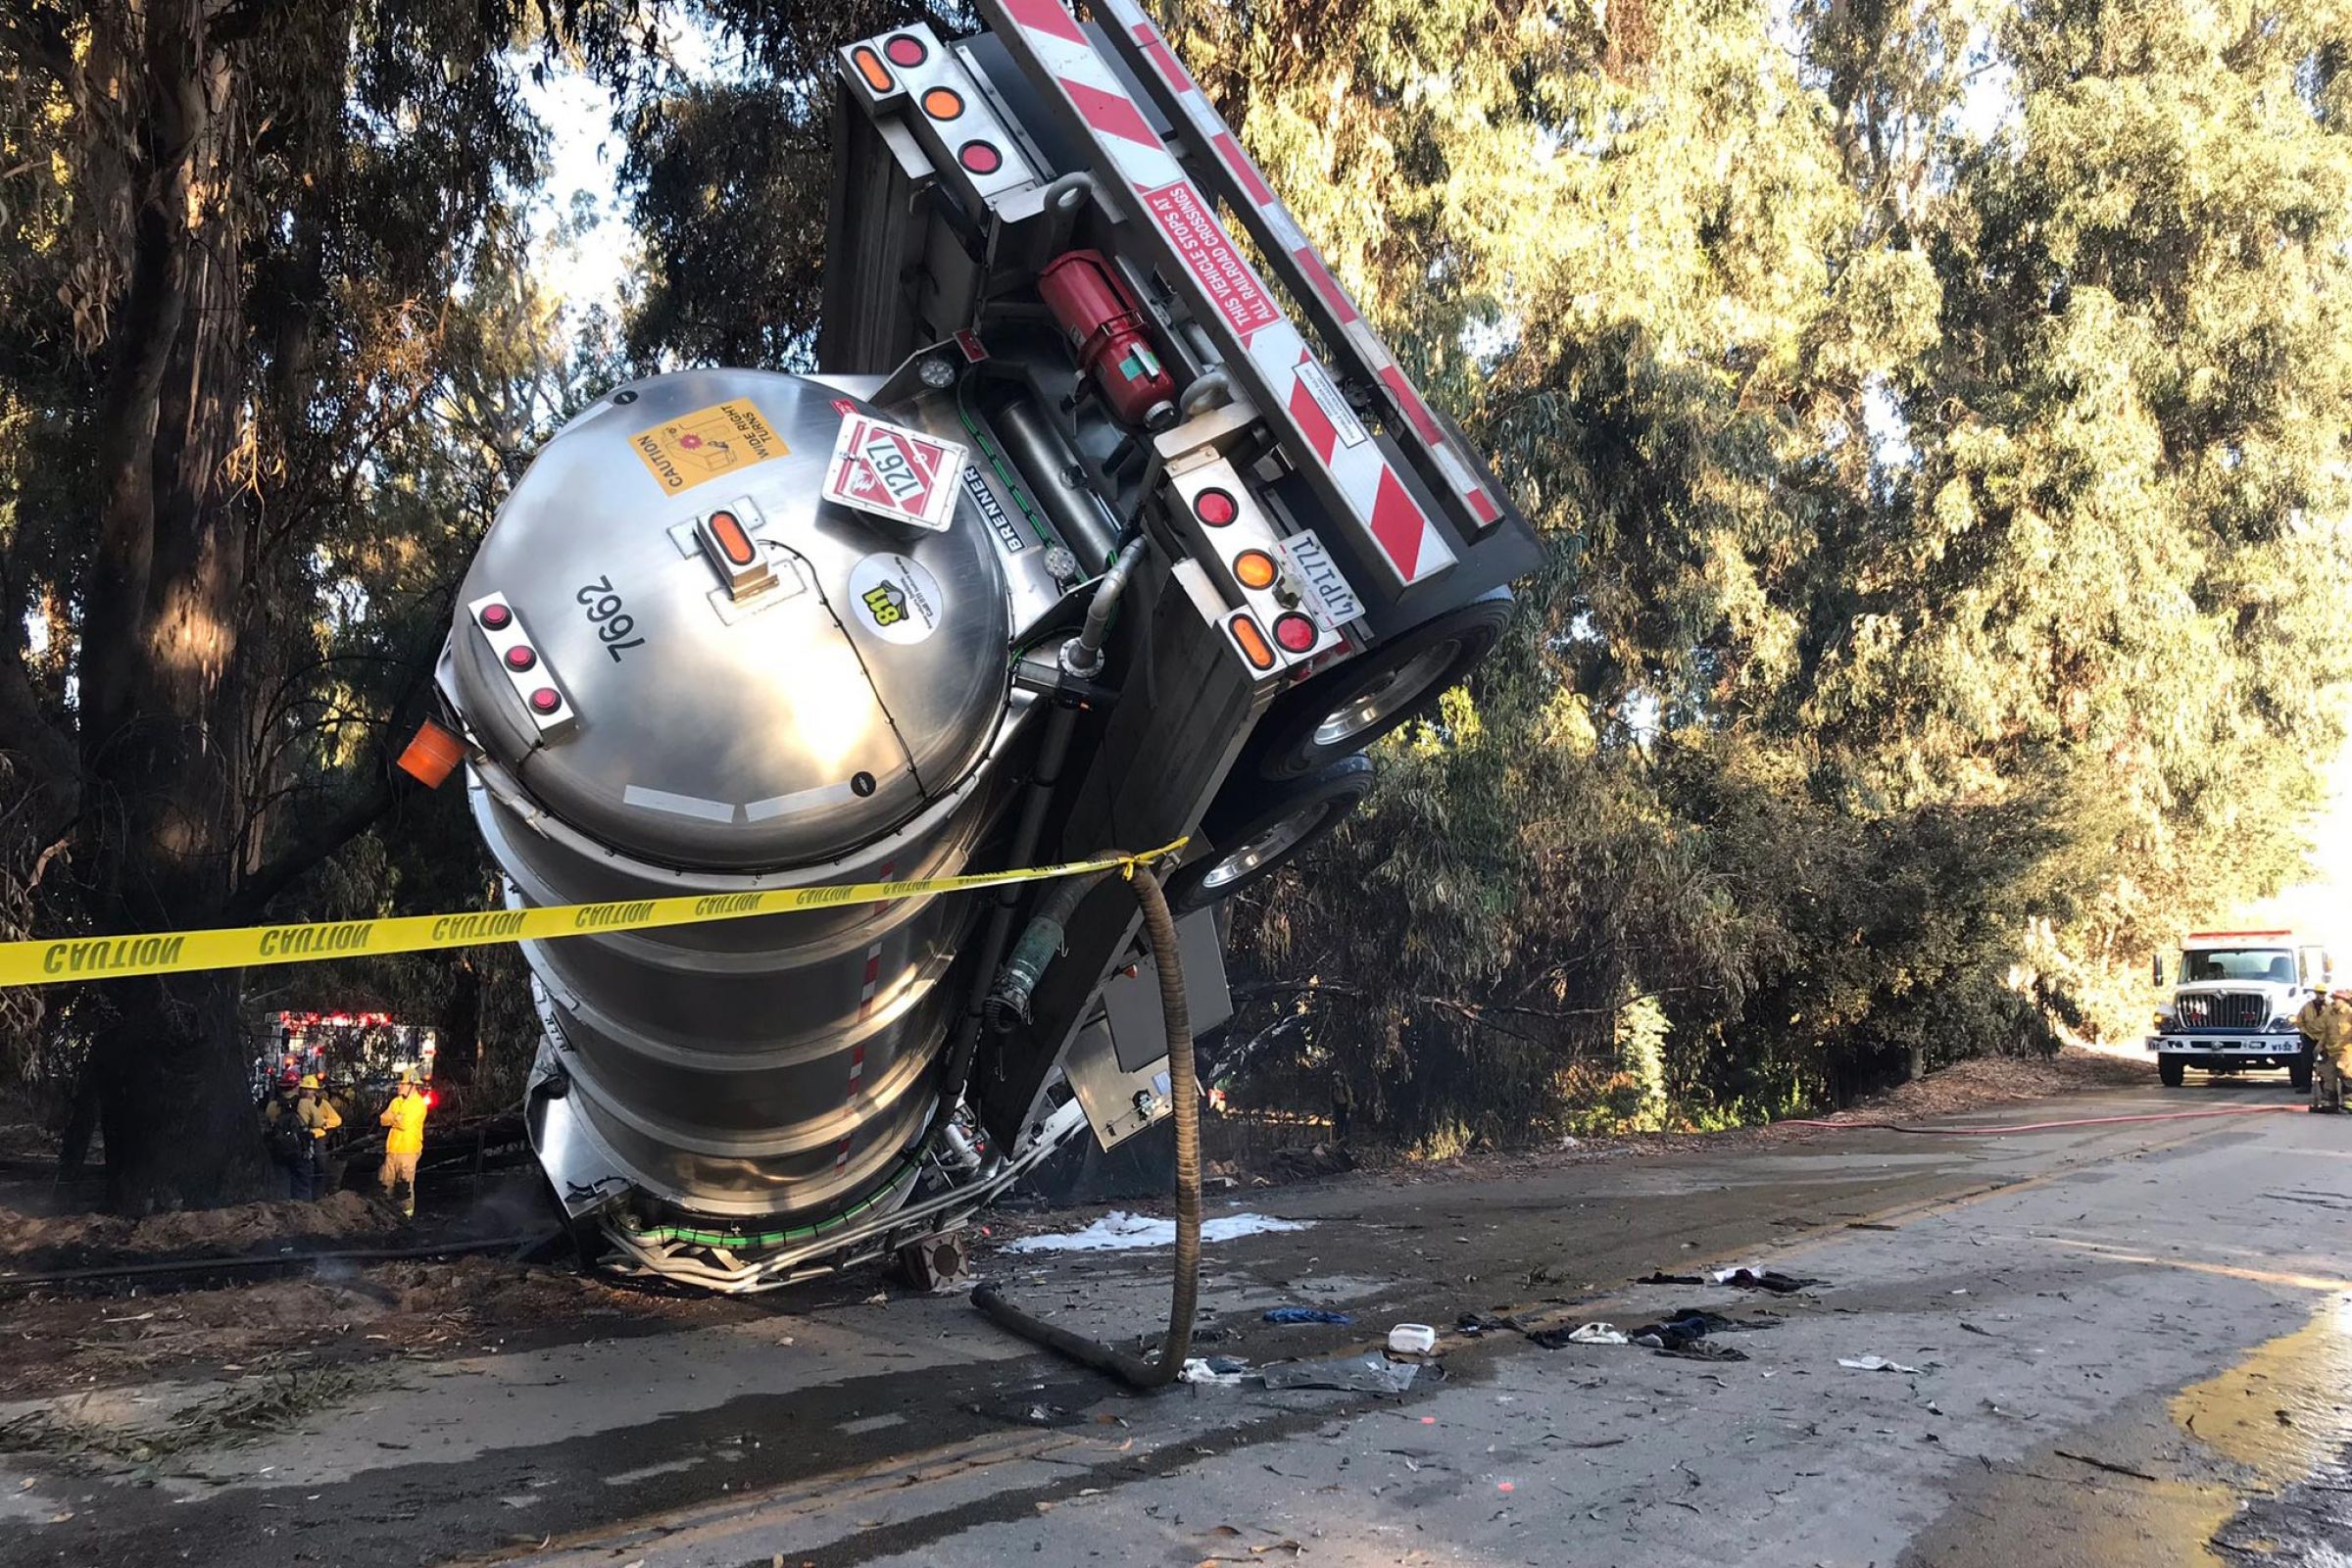 Tanker Truck after fire put out, Santa Barbara County Fire Department